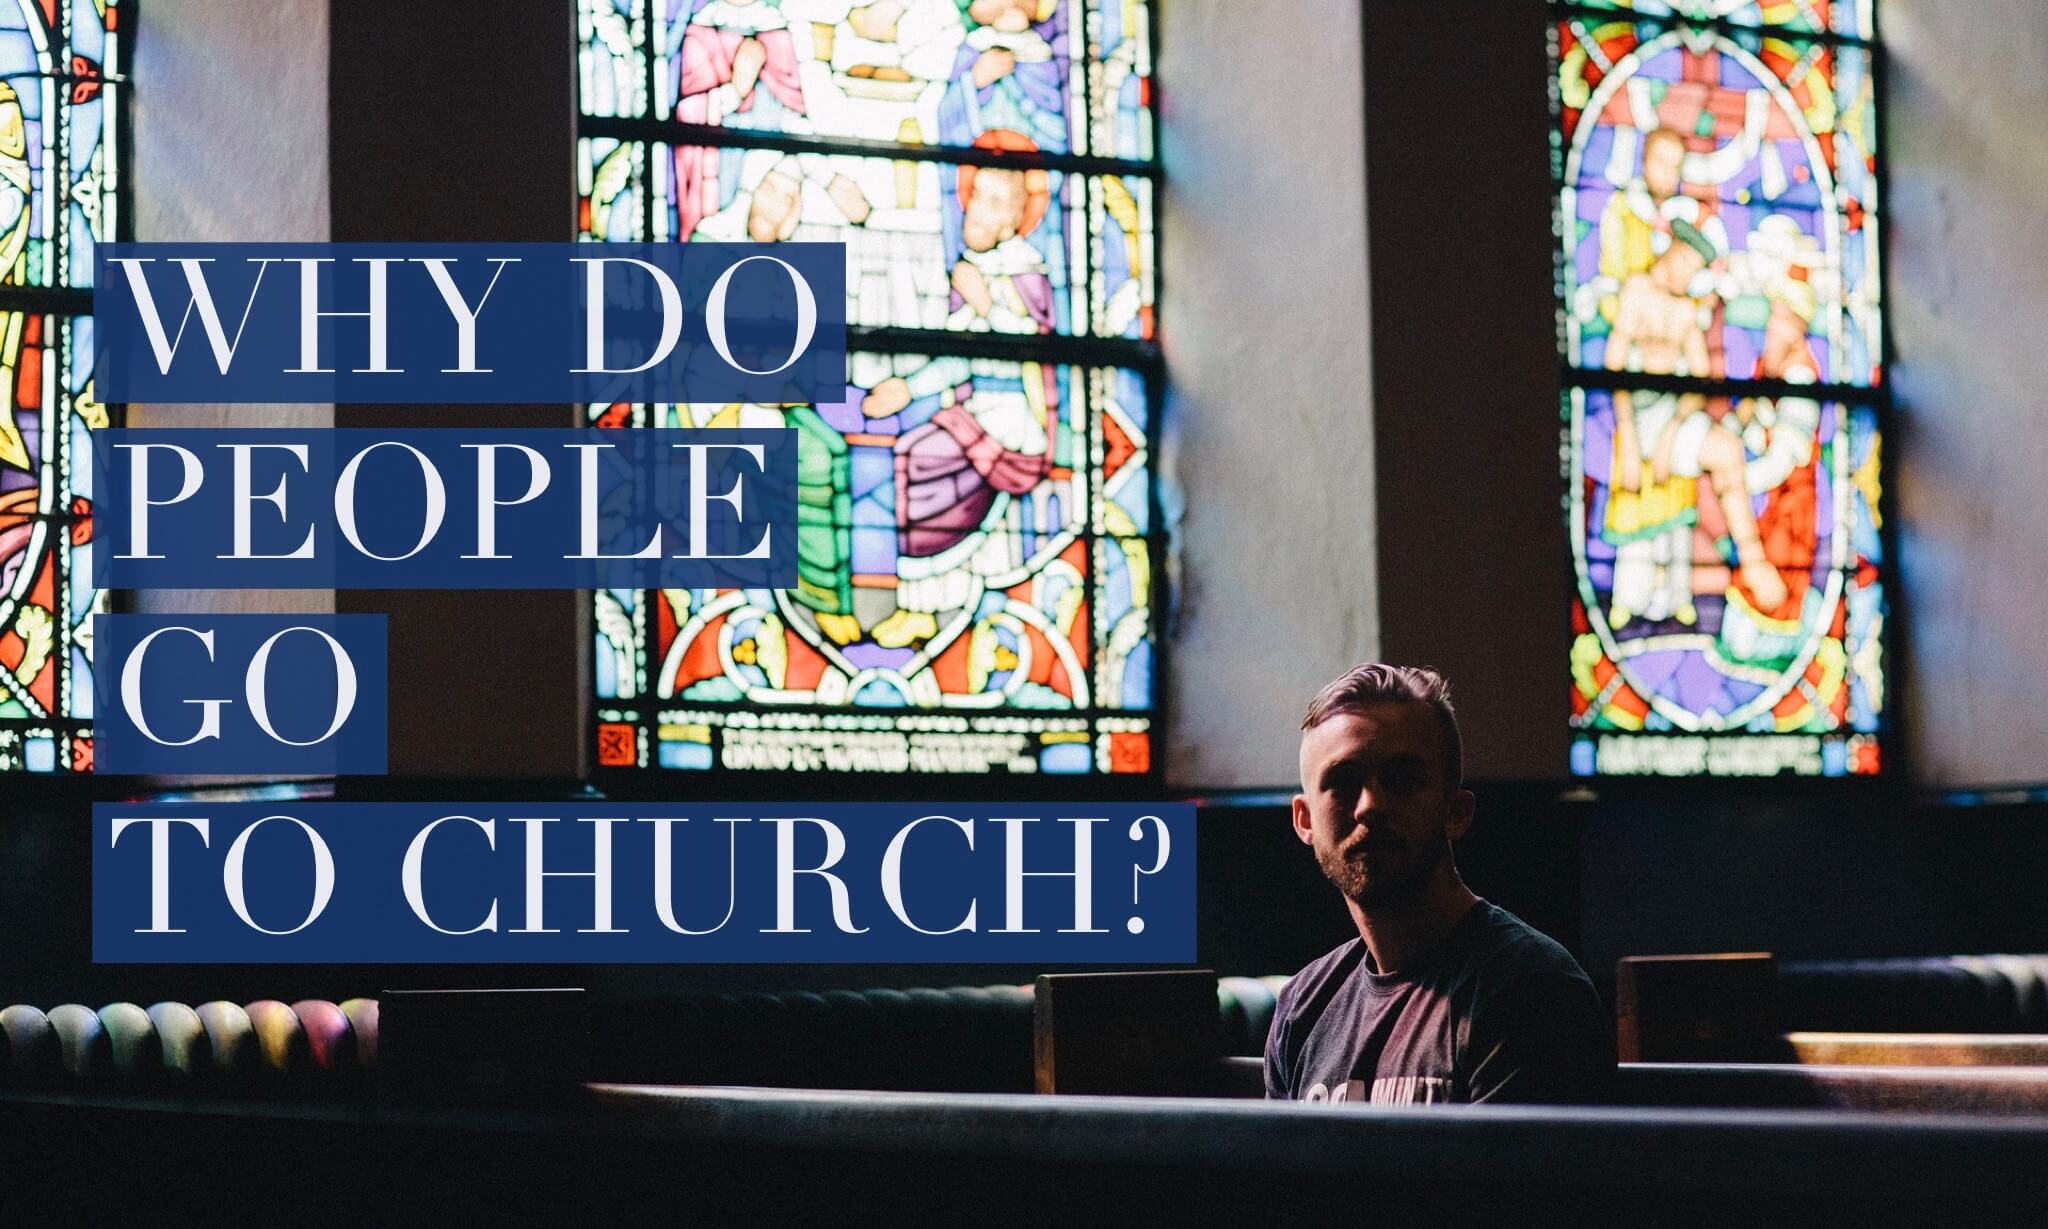 Why Do People Go to Church? This Study Found It's Not the Sermon